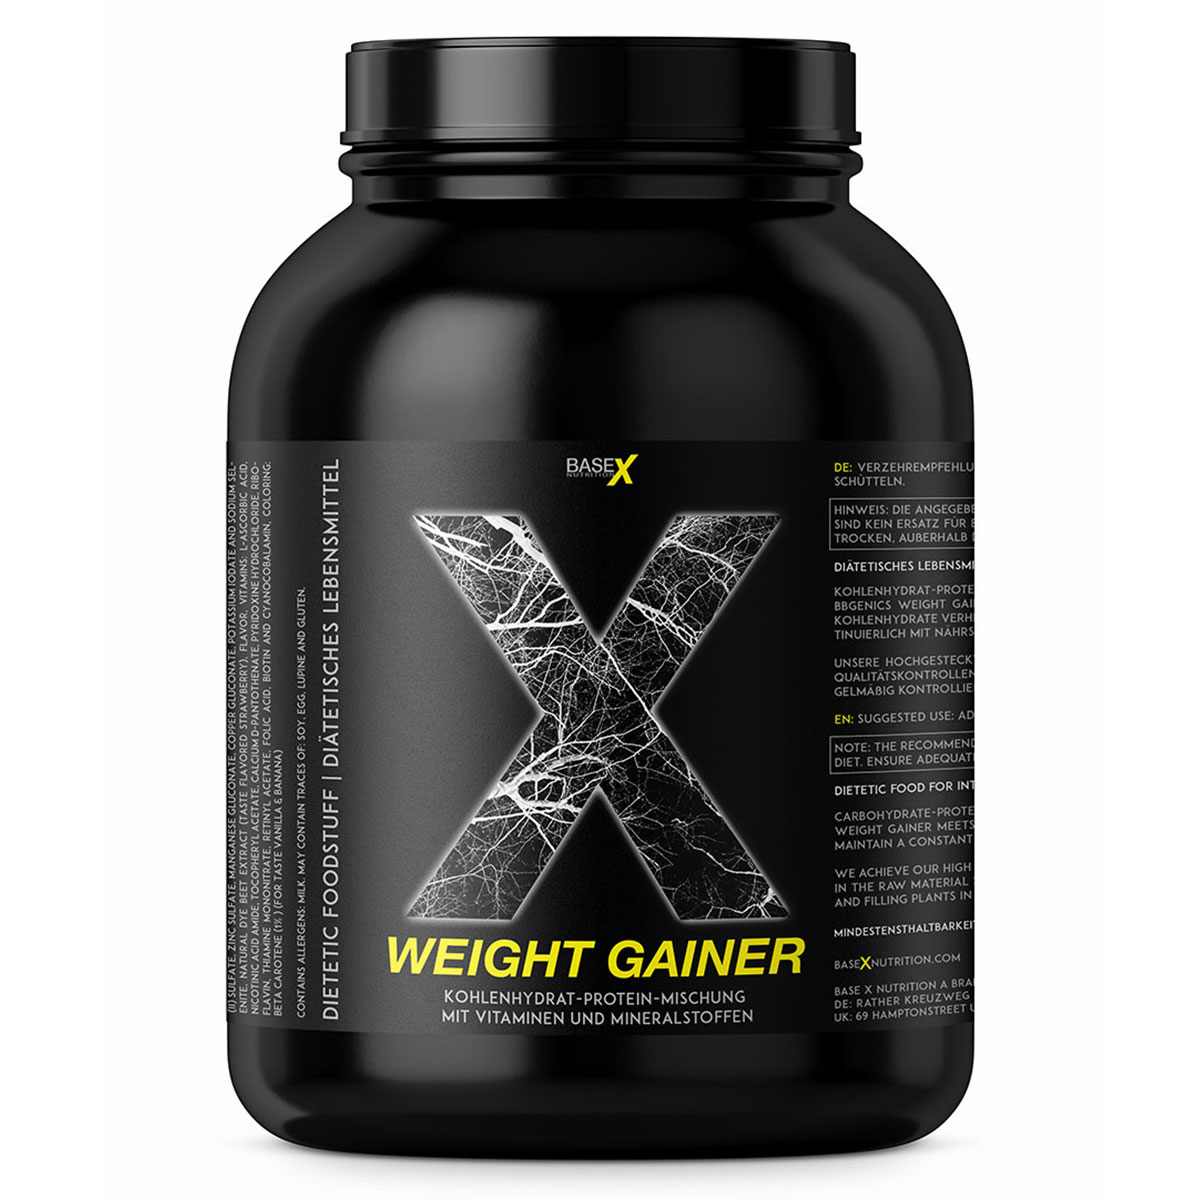 Weight Gainer Archive - BaseX Nurition.